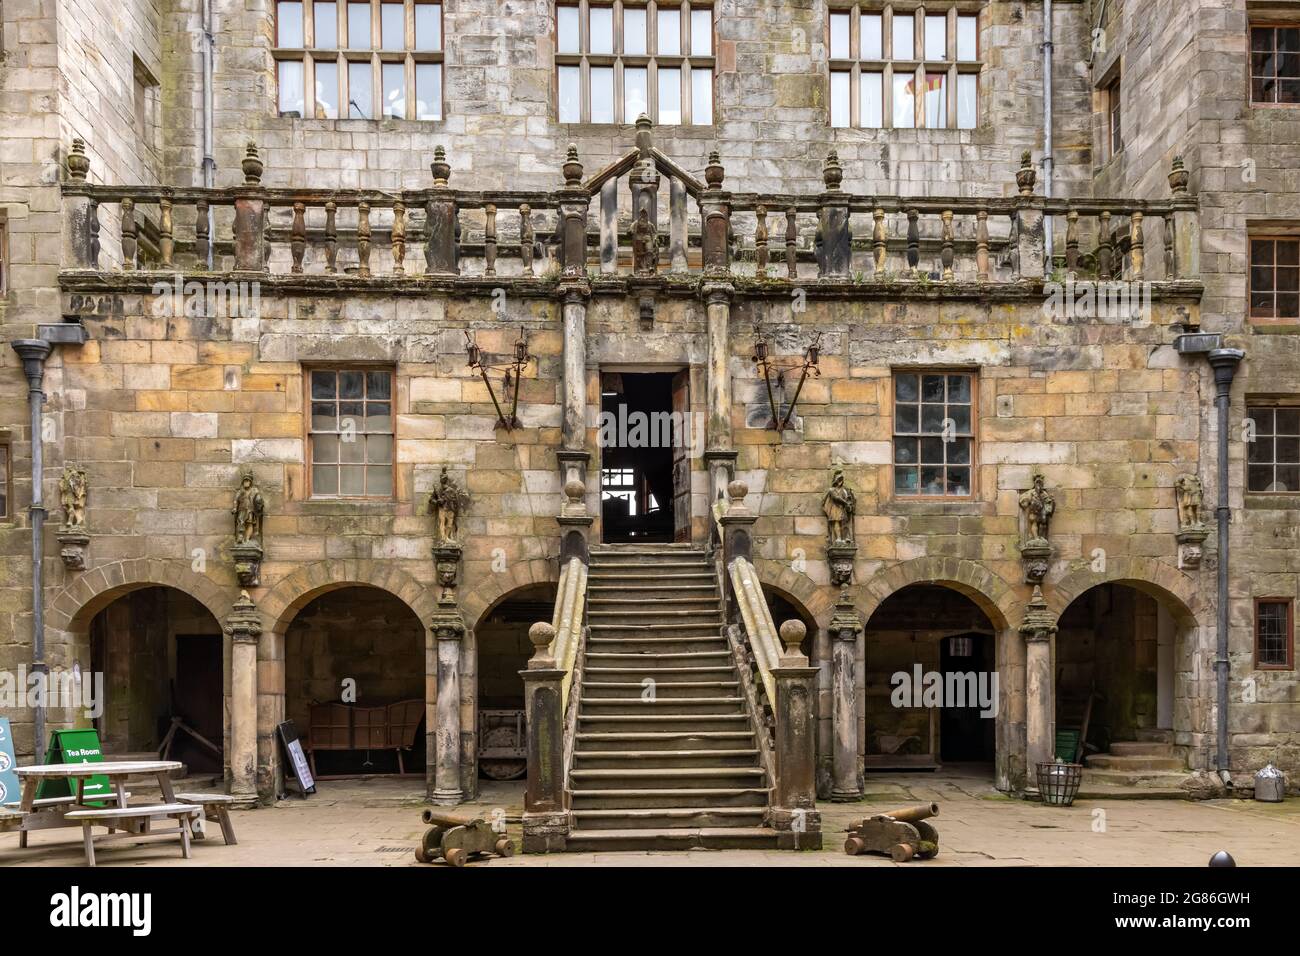 Chillingham Castle is a 13th century, Grade 1 listed, medieval castle in Northumberland, and reputedly the most haunted castle in England. Stock Photo